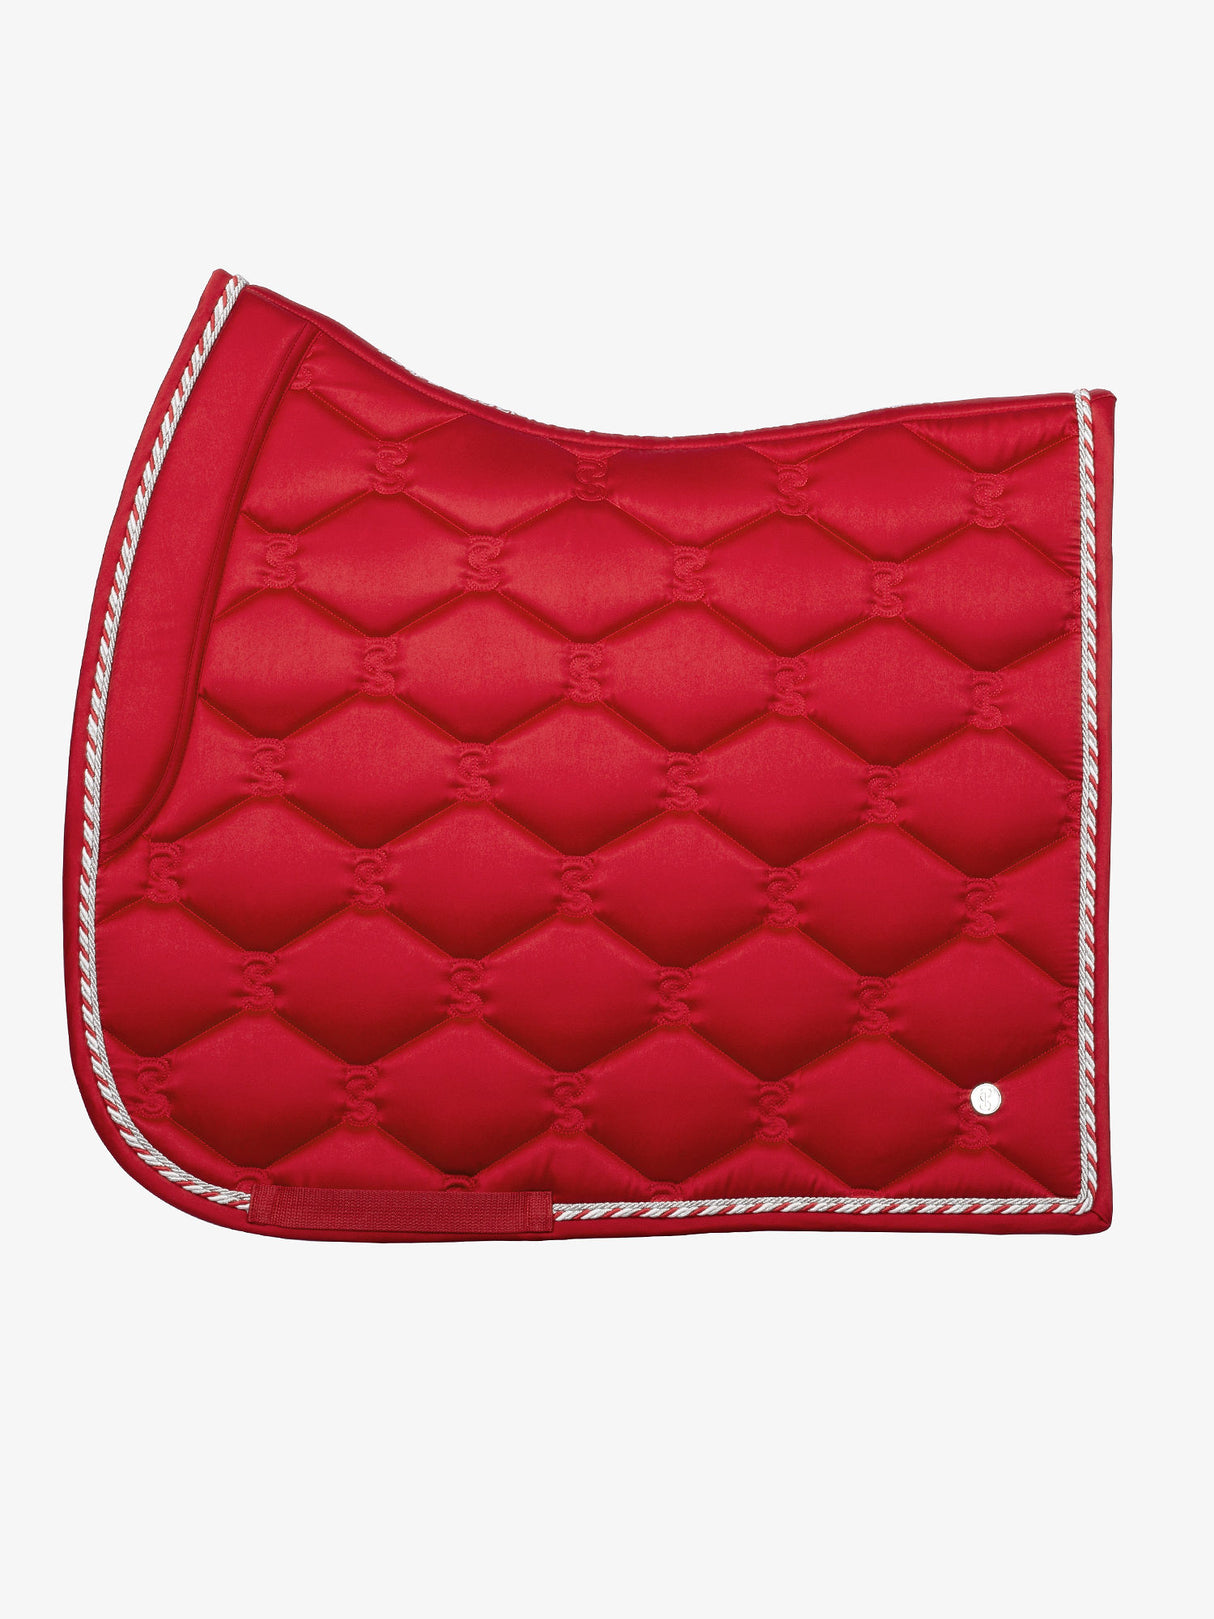 PS of Sweden Signature Dressage Saddle Pad Chilli Red